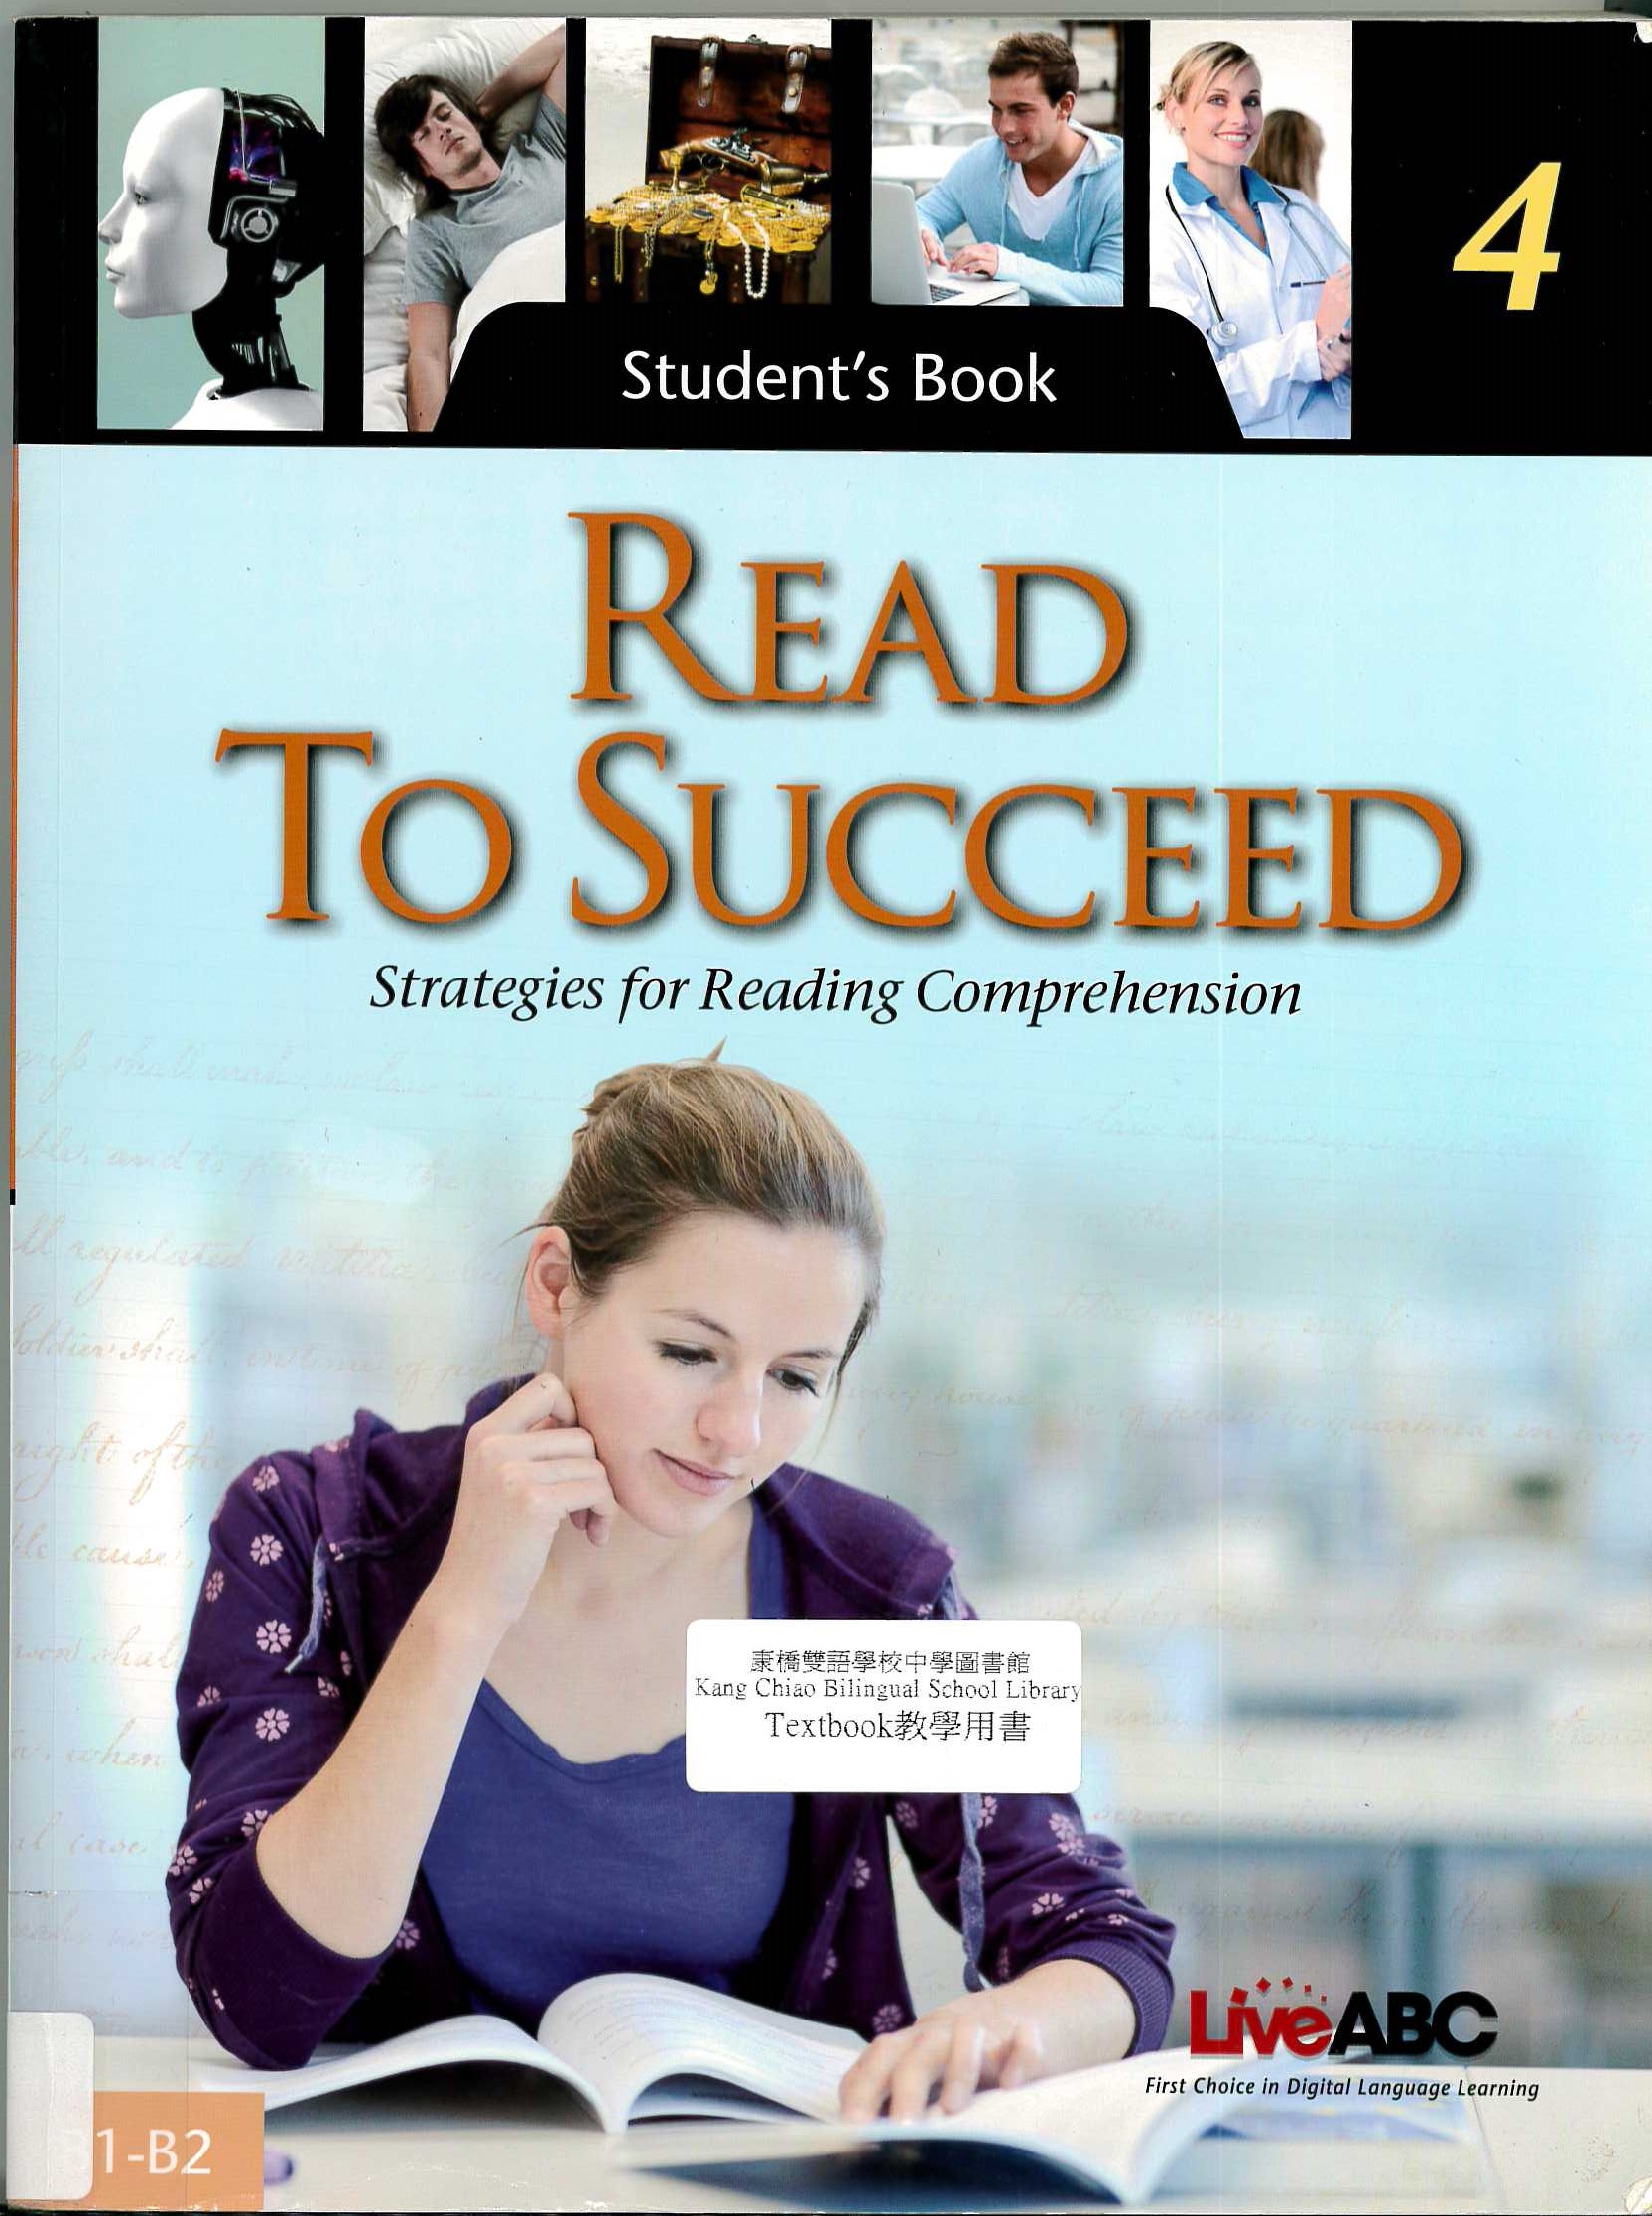 Read to succeed (4) [Student